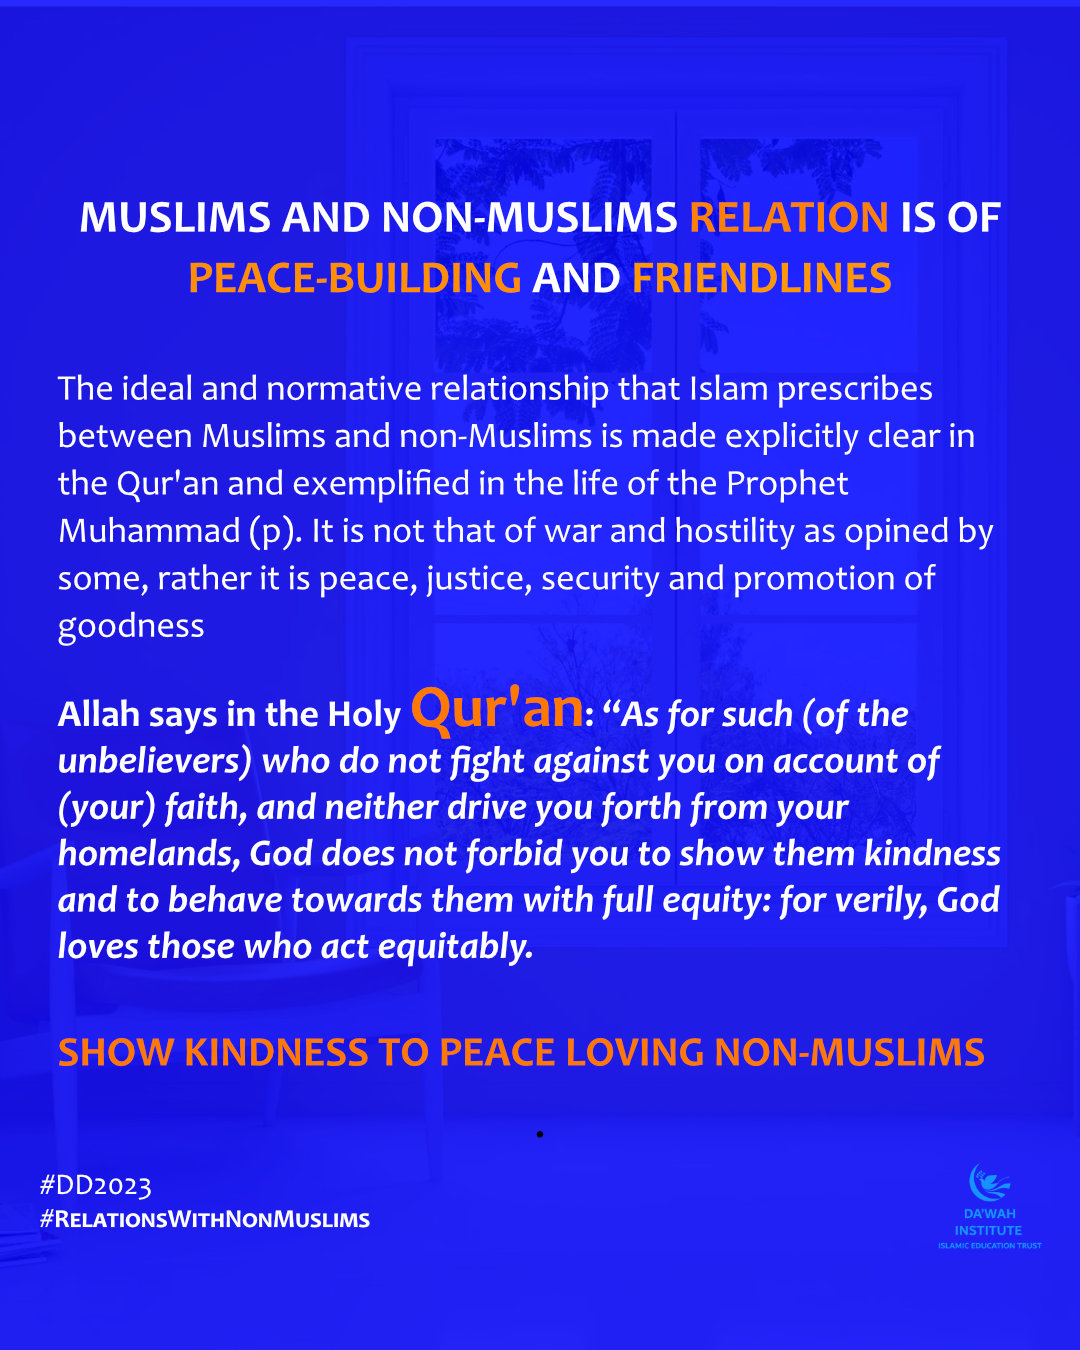 MUSLIMS AND NON-MUSLIMS RELATION IS OF PEACE-BUILDING AND FRIENDLINES